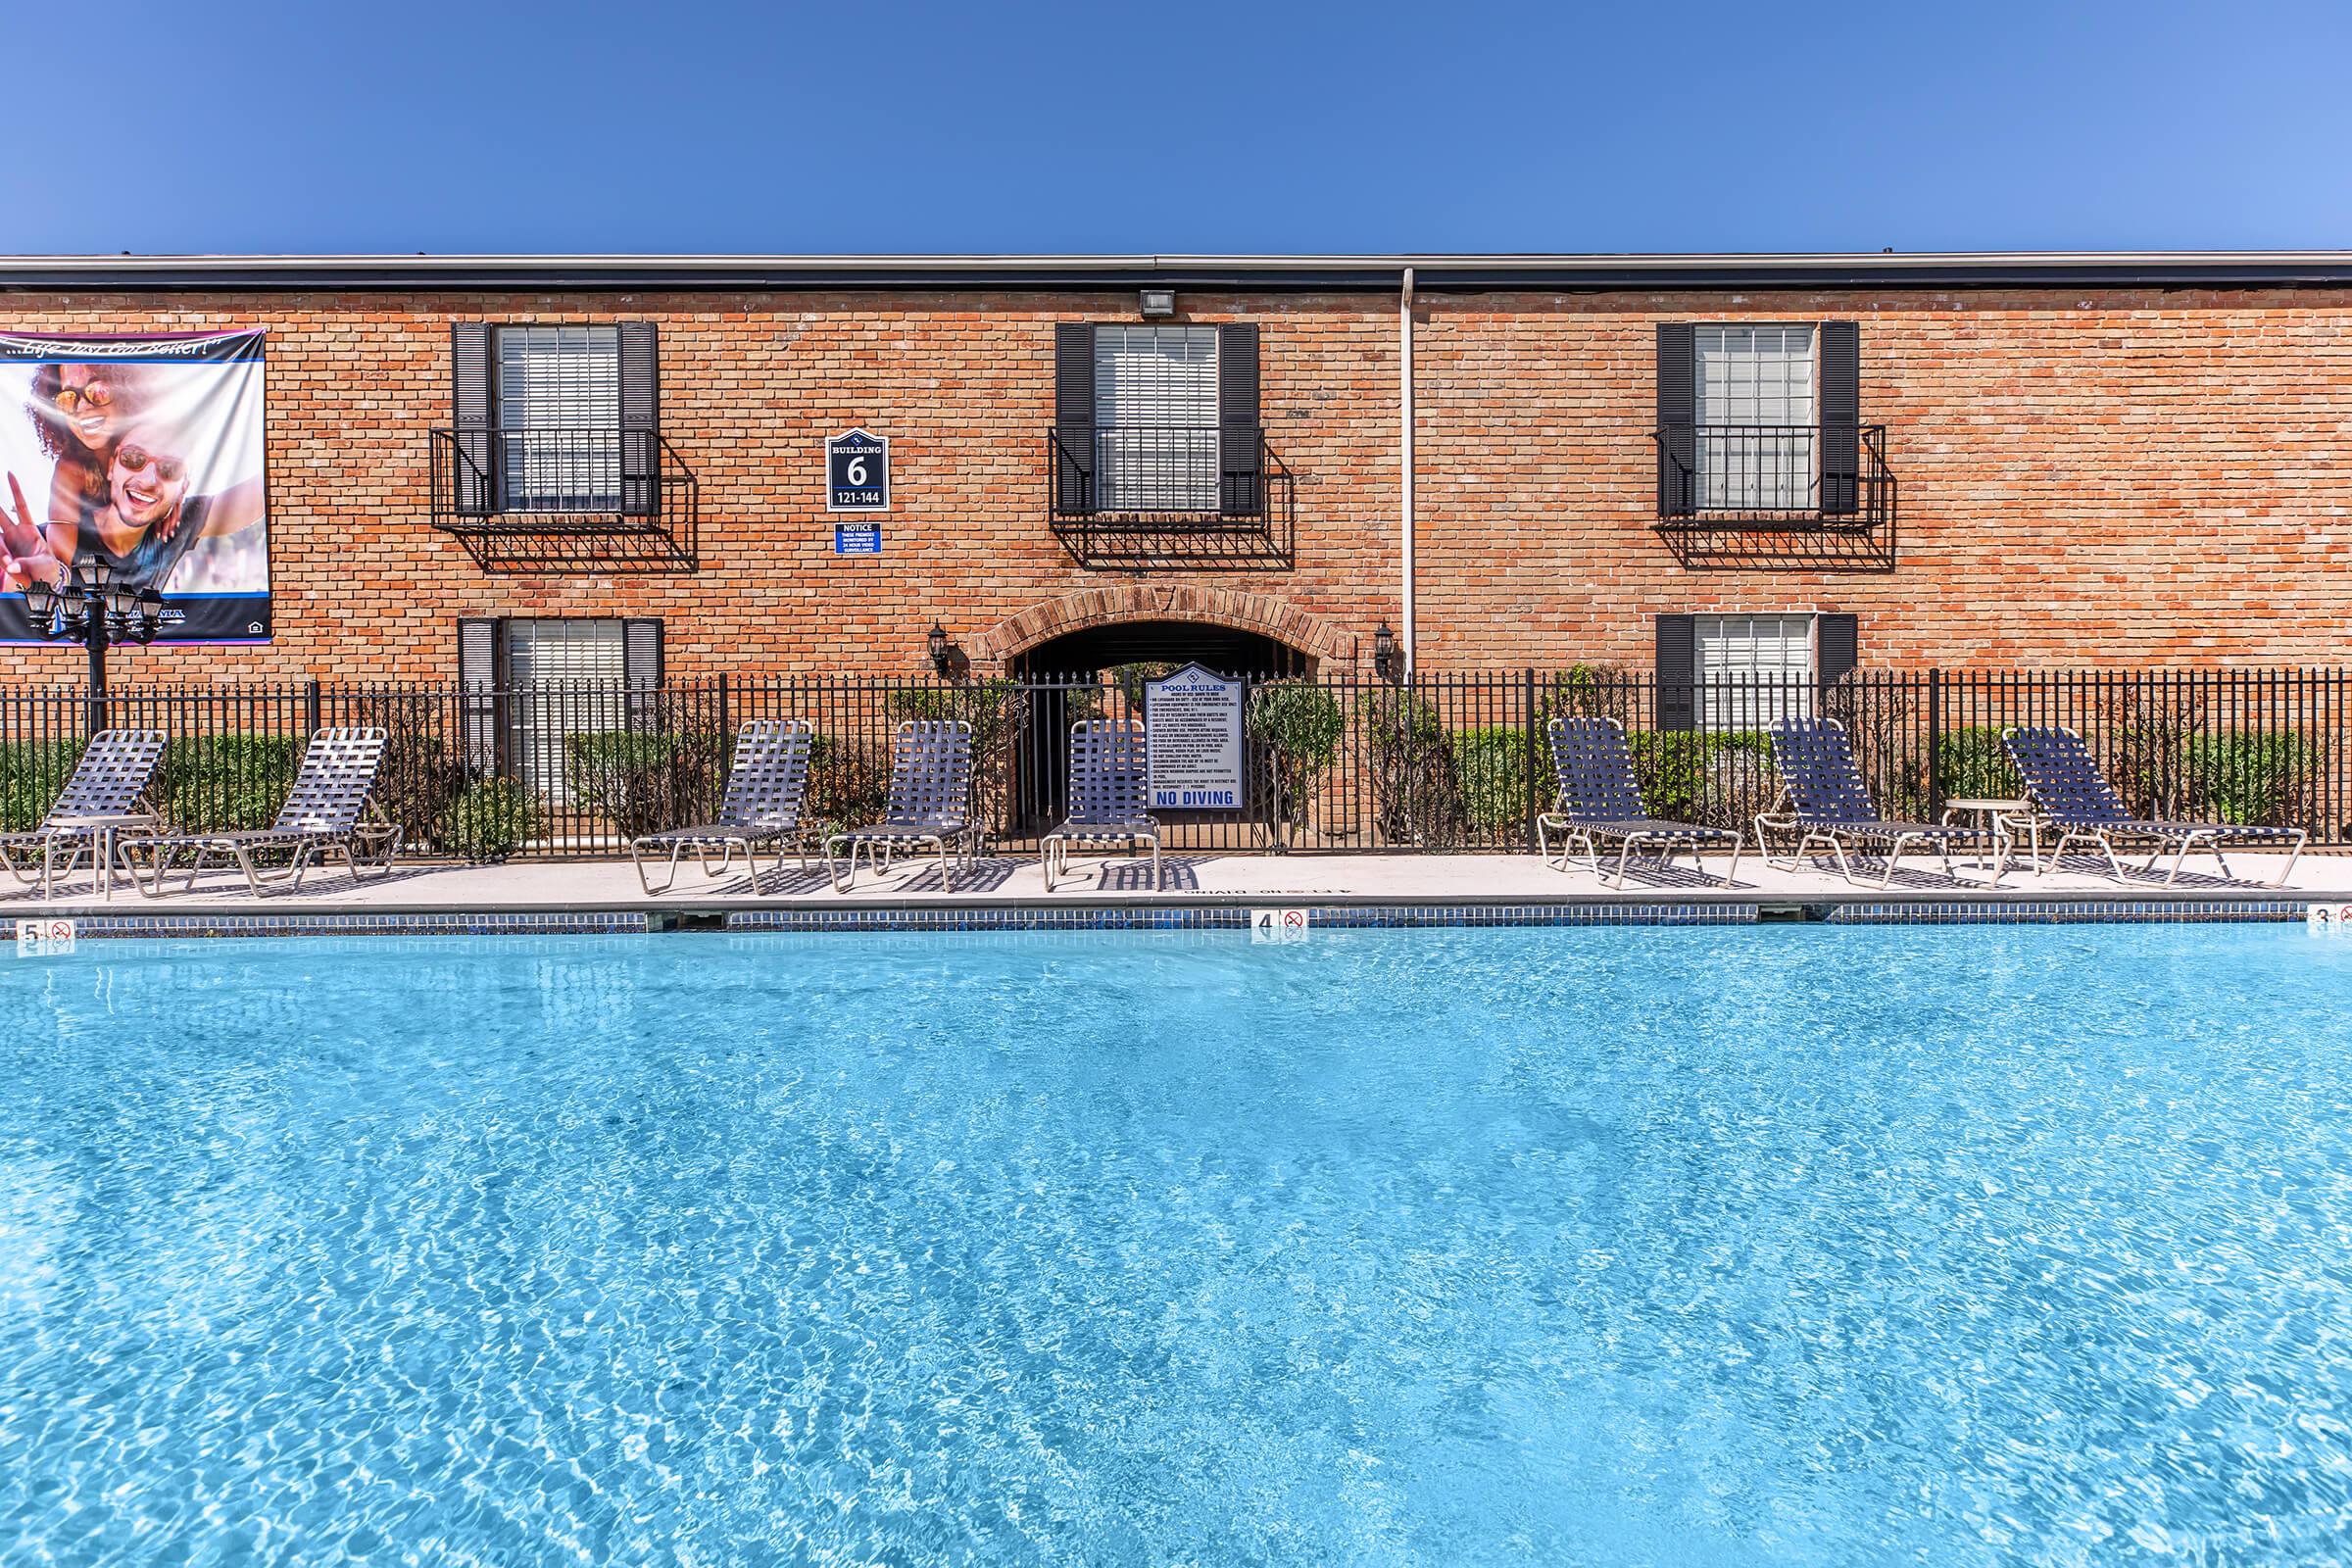 a large brick building with a pool of water